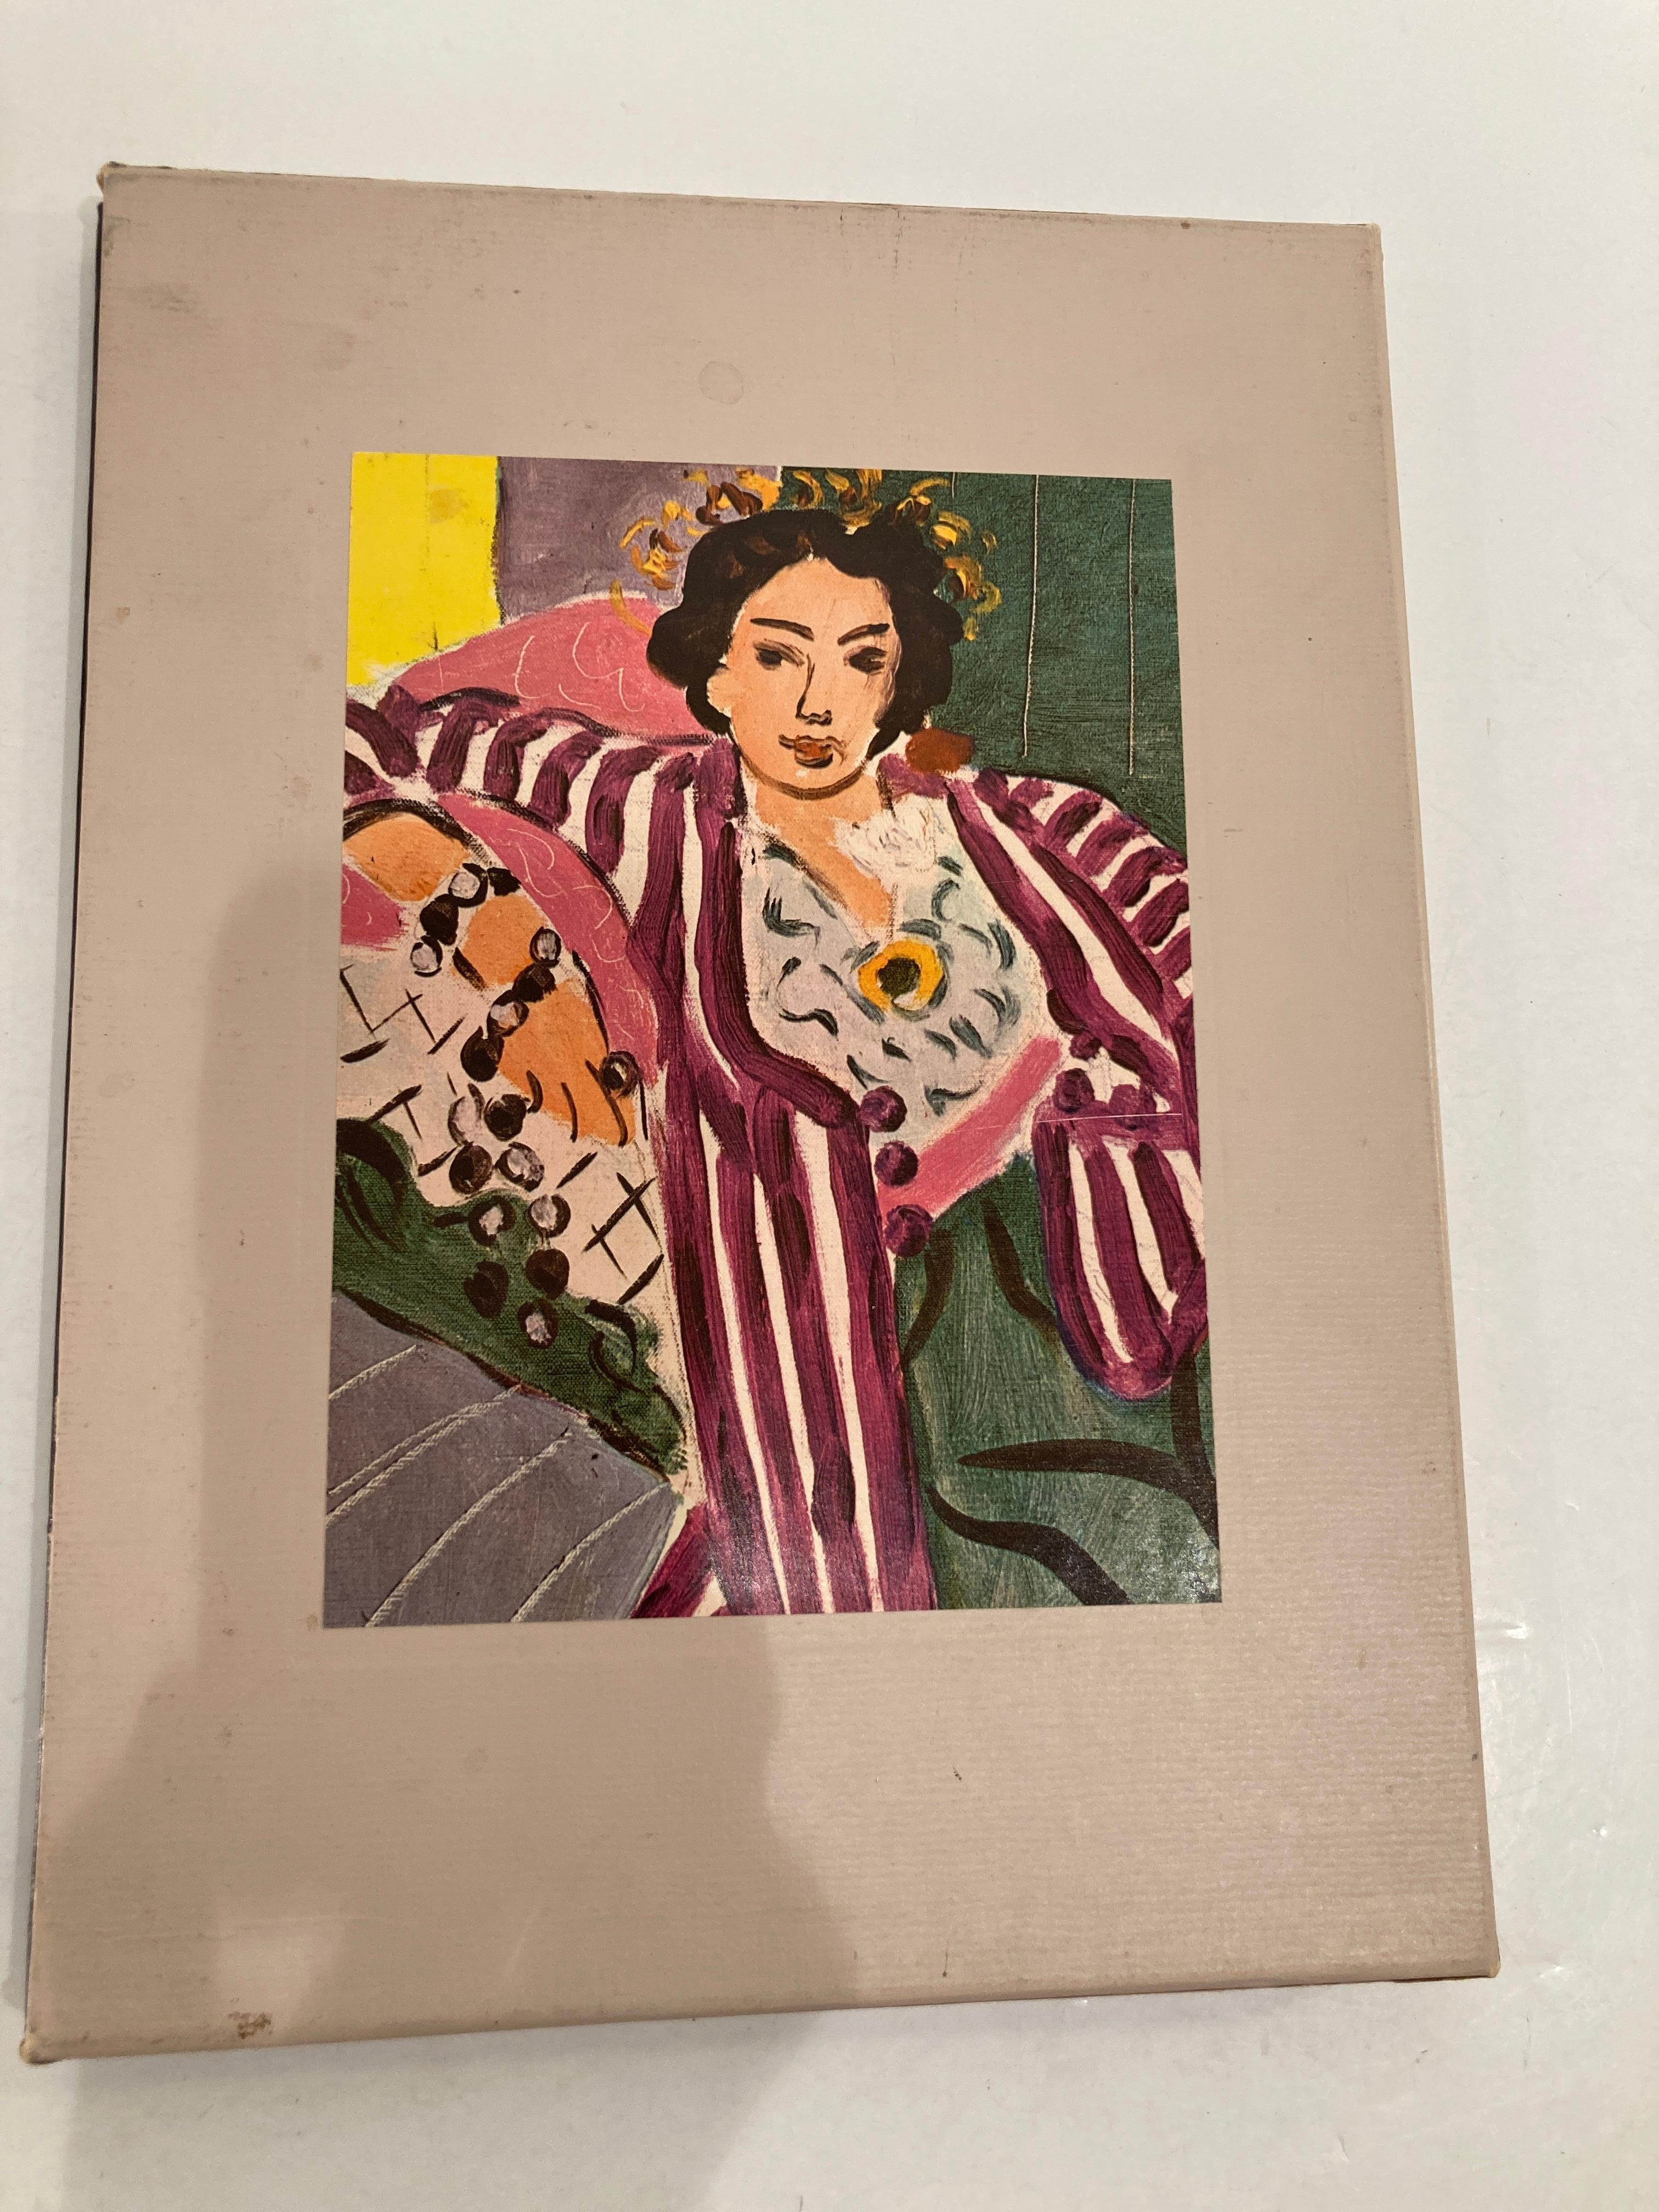 The world of Matisse, 1869-1954 Book by John Russell Hardcover Book in Slipcase.
An account of the life, career and works of Henri Matisse, the French artist who changed the course of Western art, with background information on the times in which he